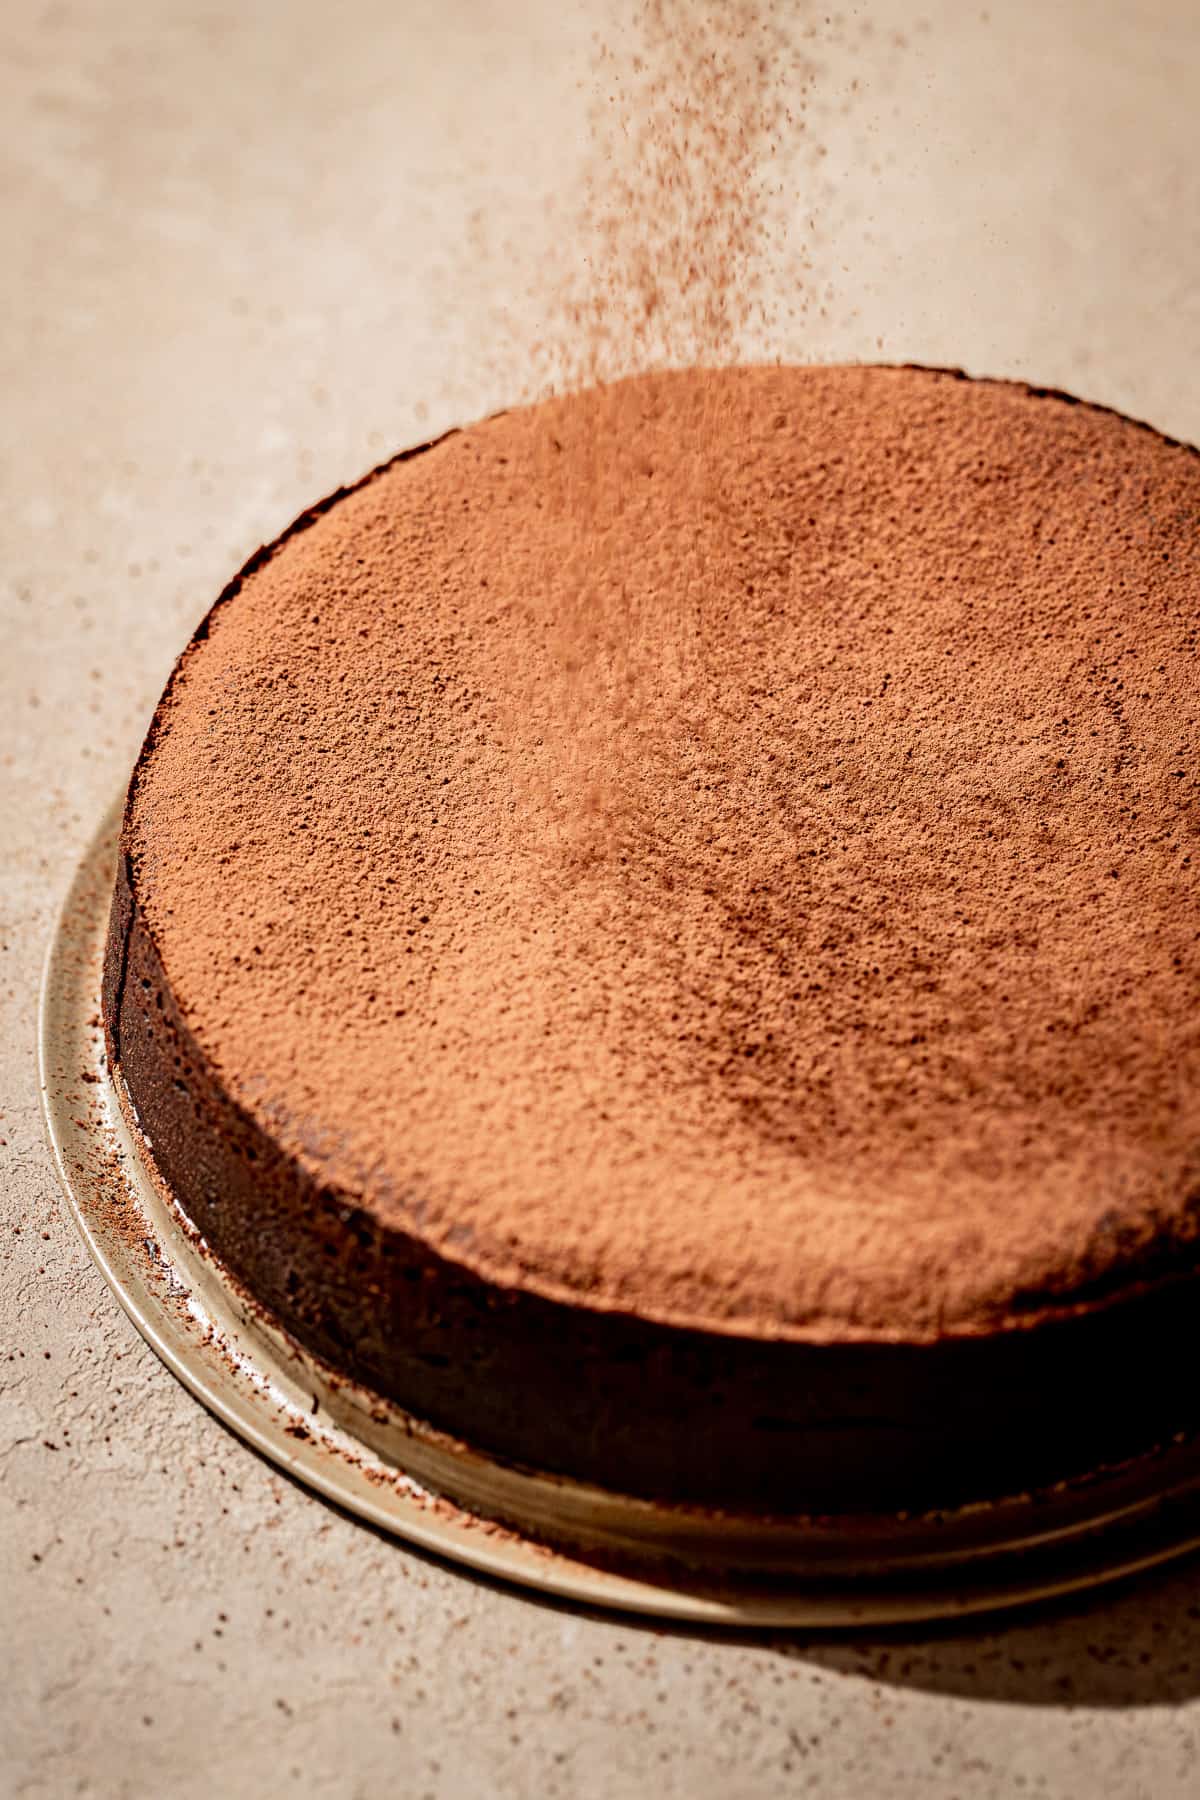 red wine chocolate cake on base of cake pan with cocoa powder dusted on top.